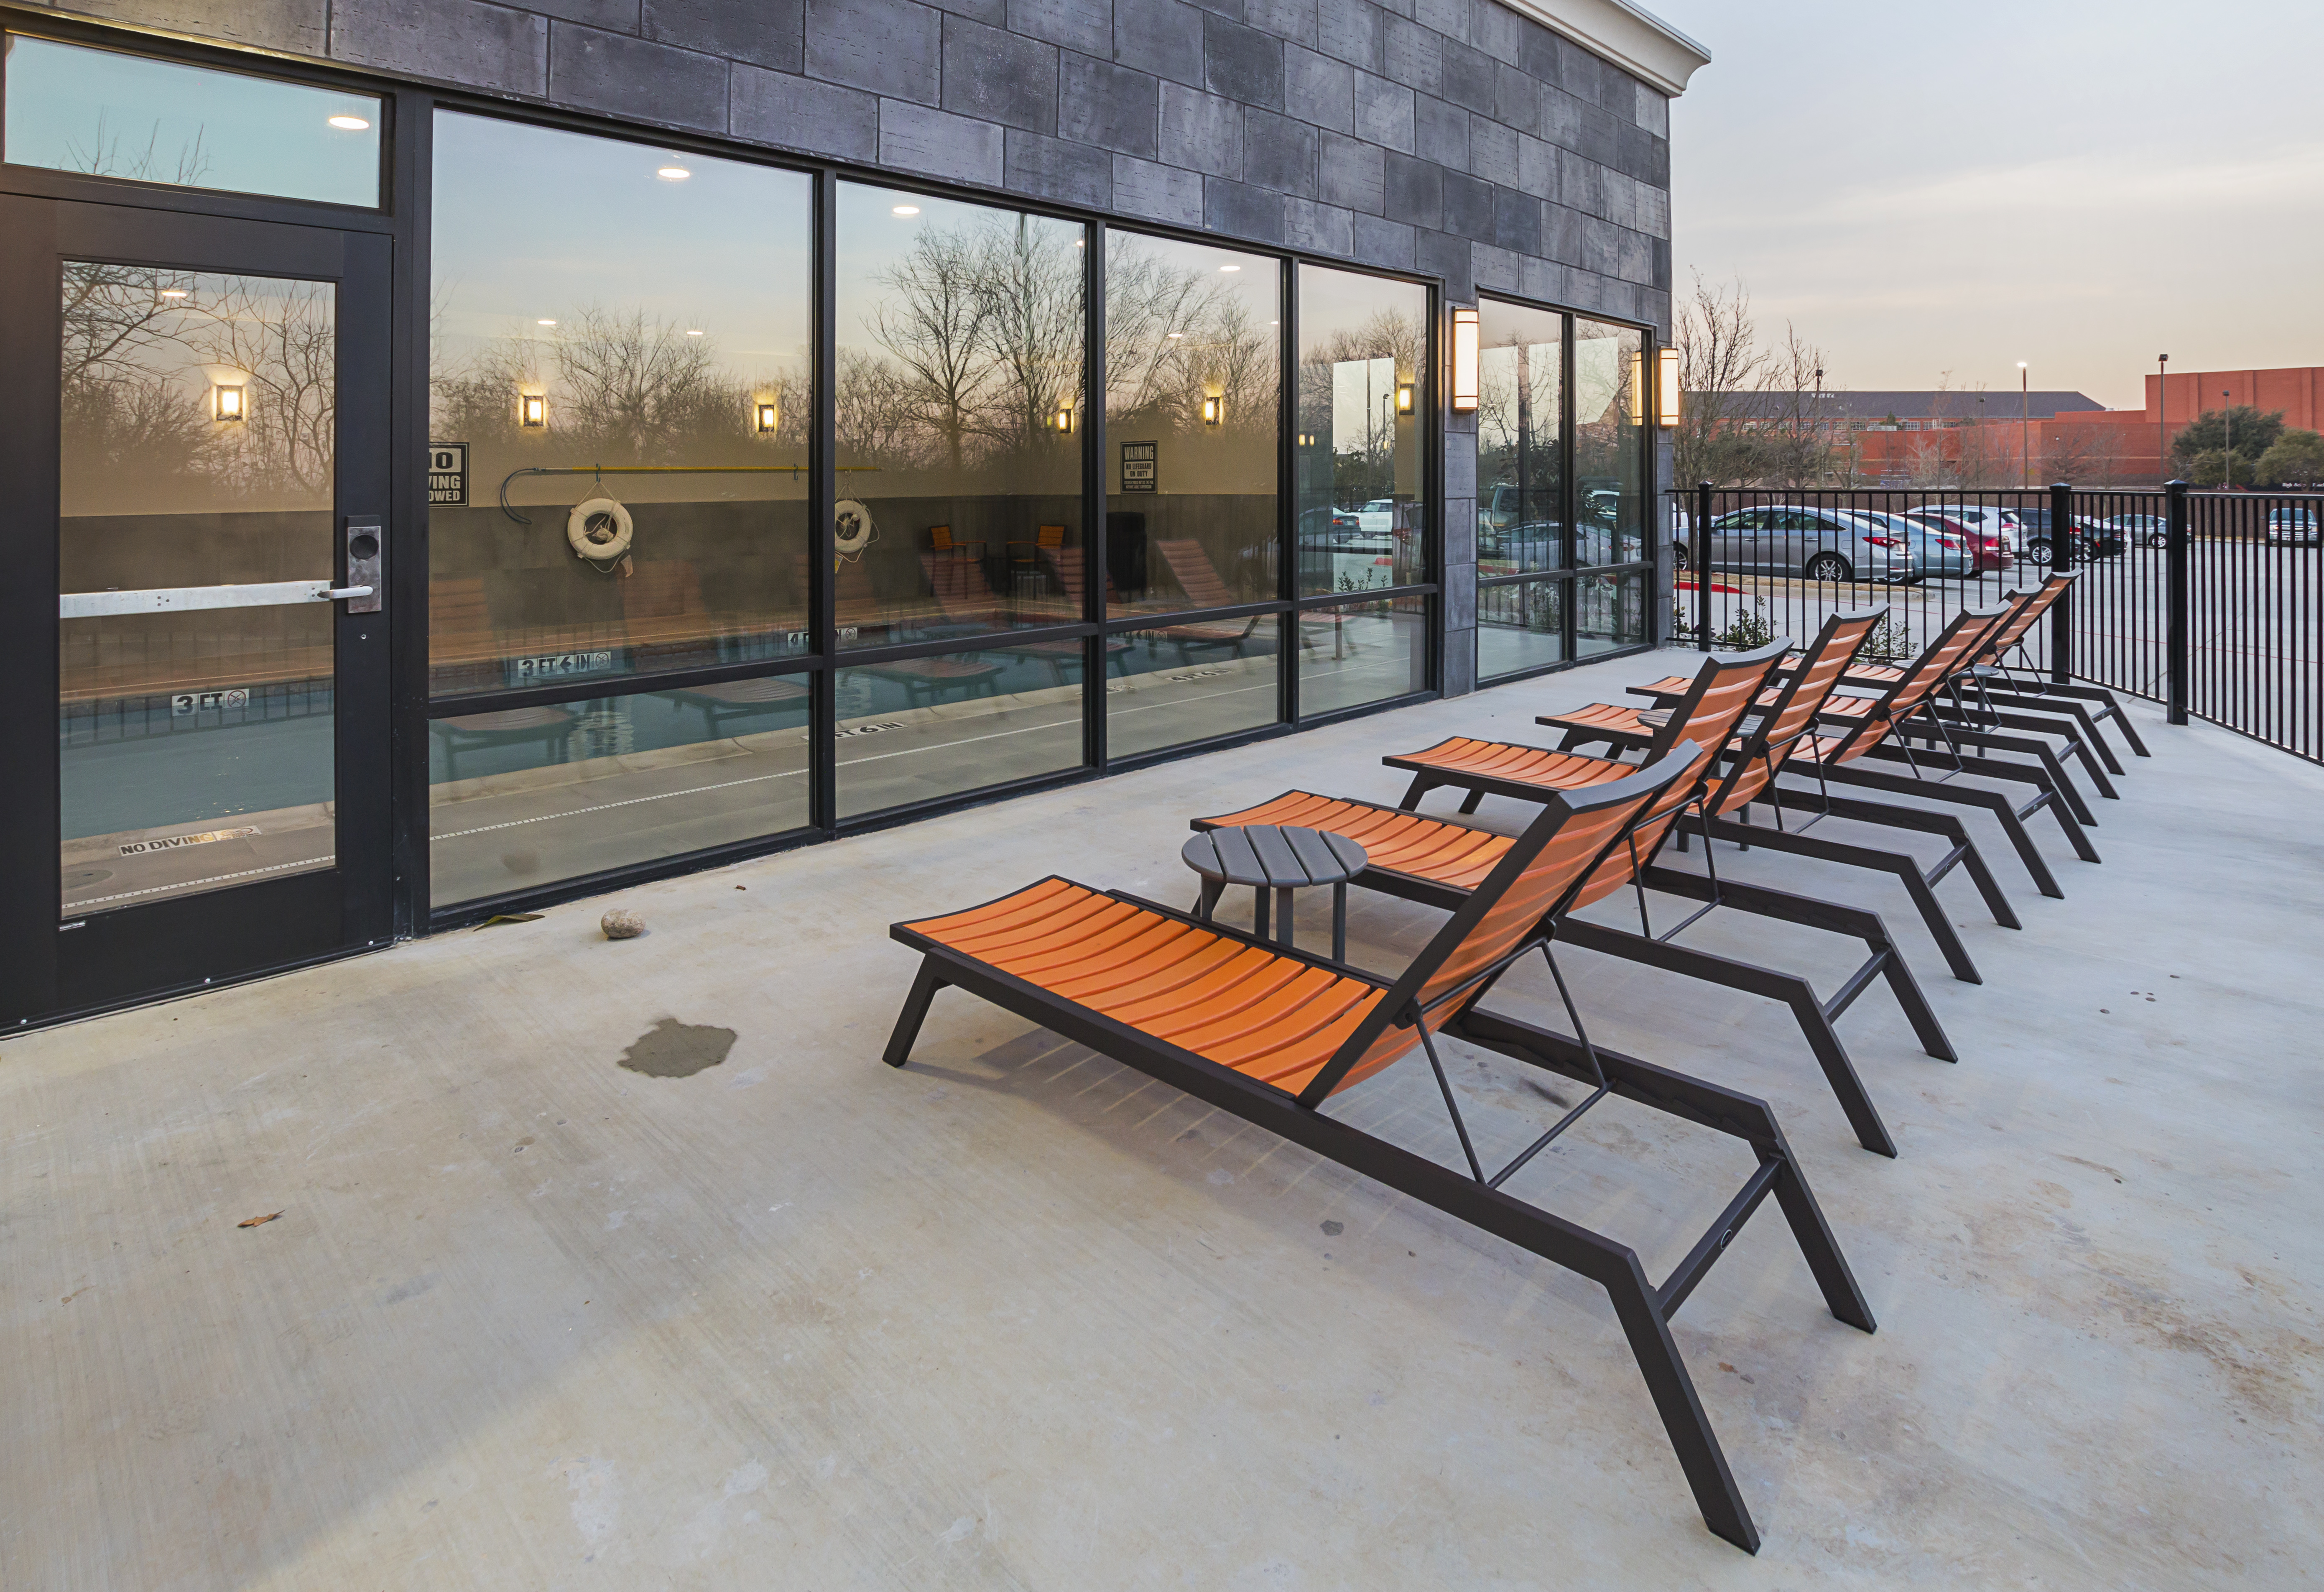 Hotel patio with chaise lounge chairs and
  view of indoor pool through large windows and entry door